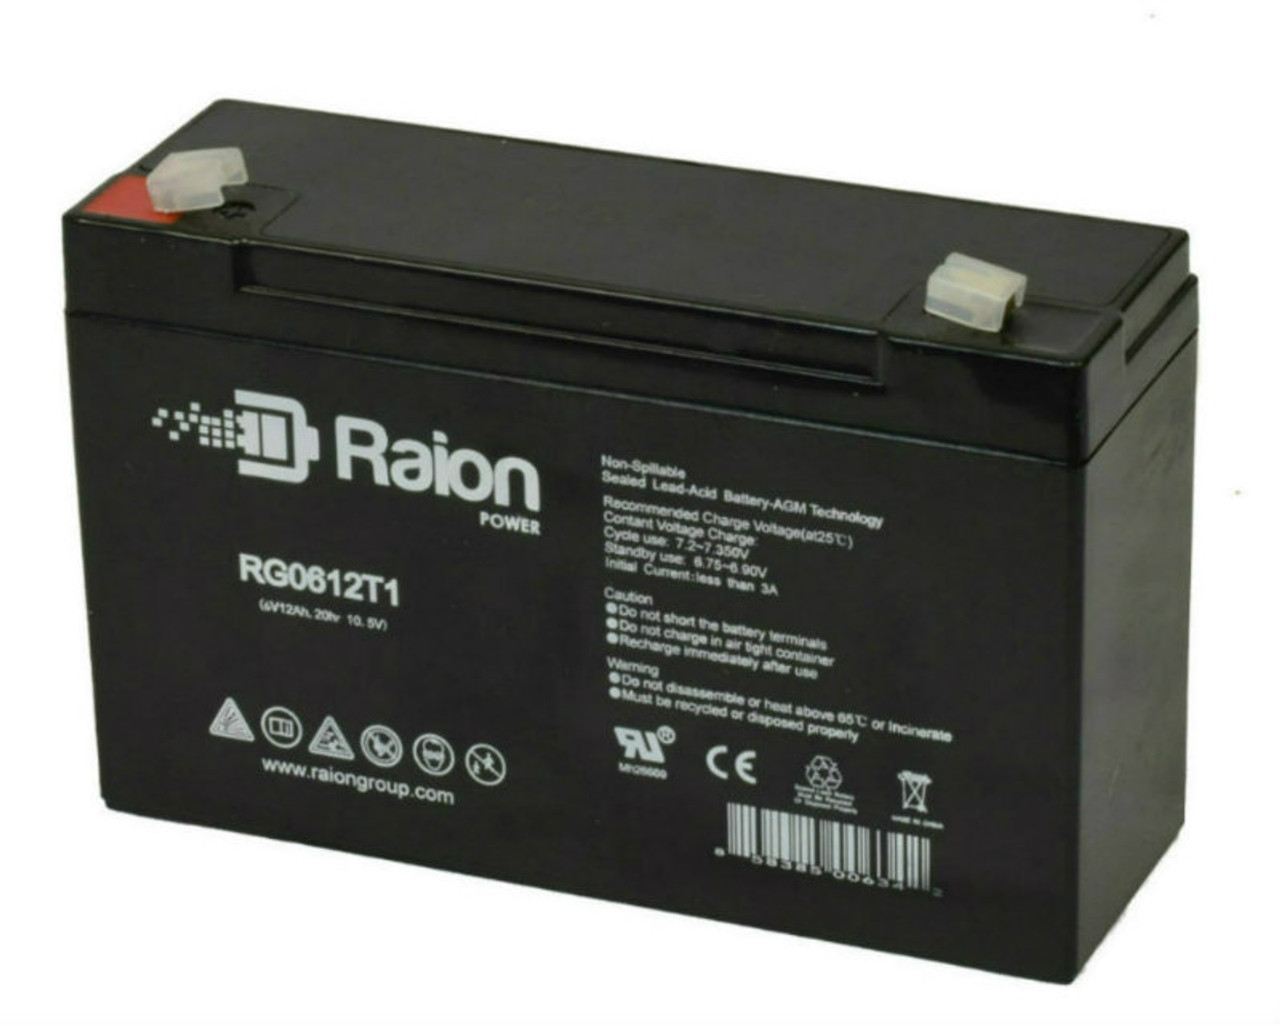 Raion Power RG06120T1 Replacement 6V 12Ah Emergency Light Battery for Edwards 1602